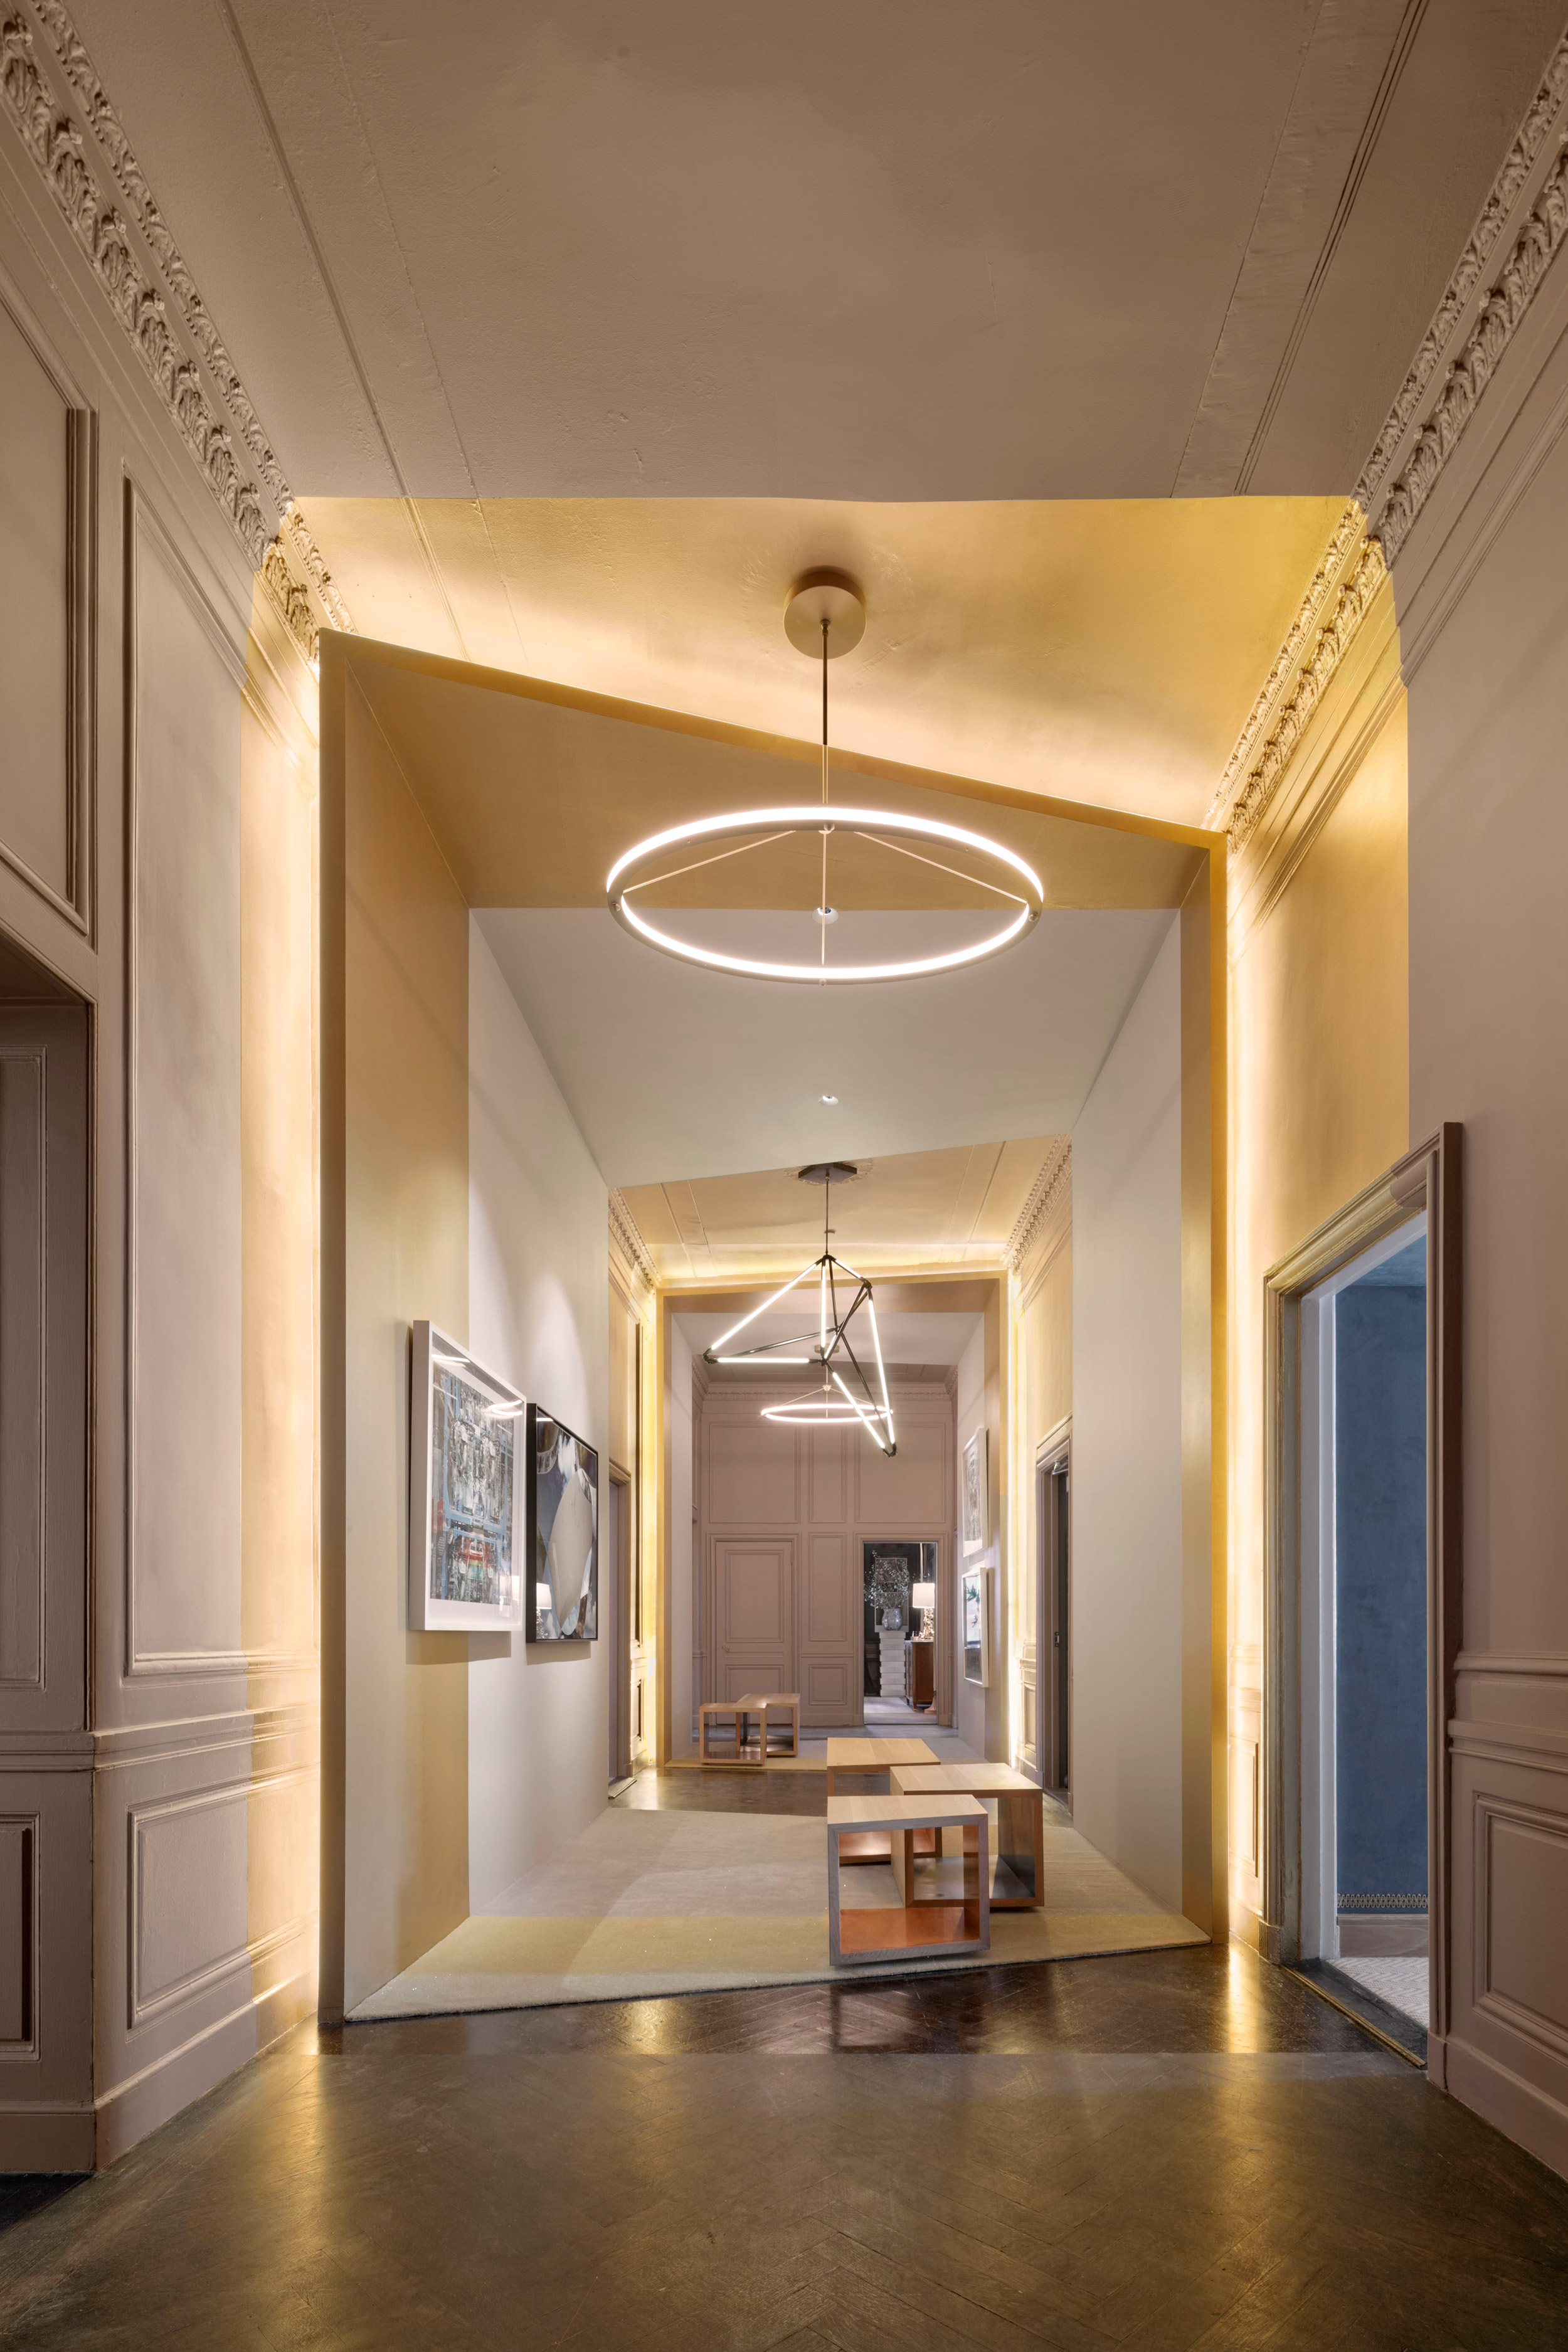 Project Name: Kips Bay Showhouse. Architect: SPAN Architecture. Photo: Timothy Bell.